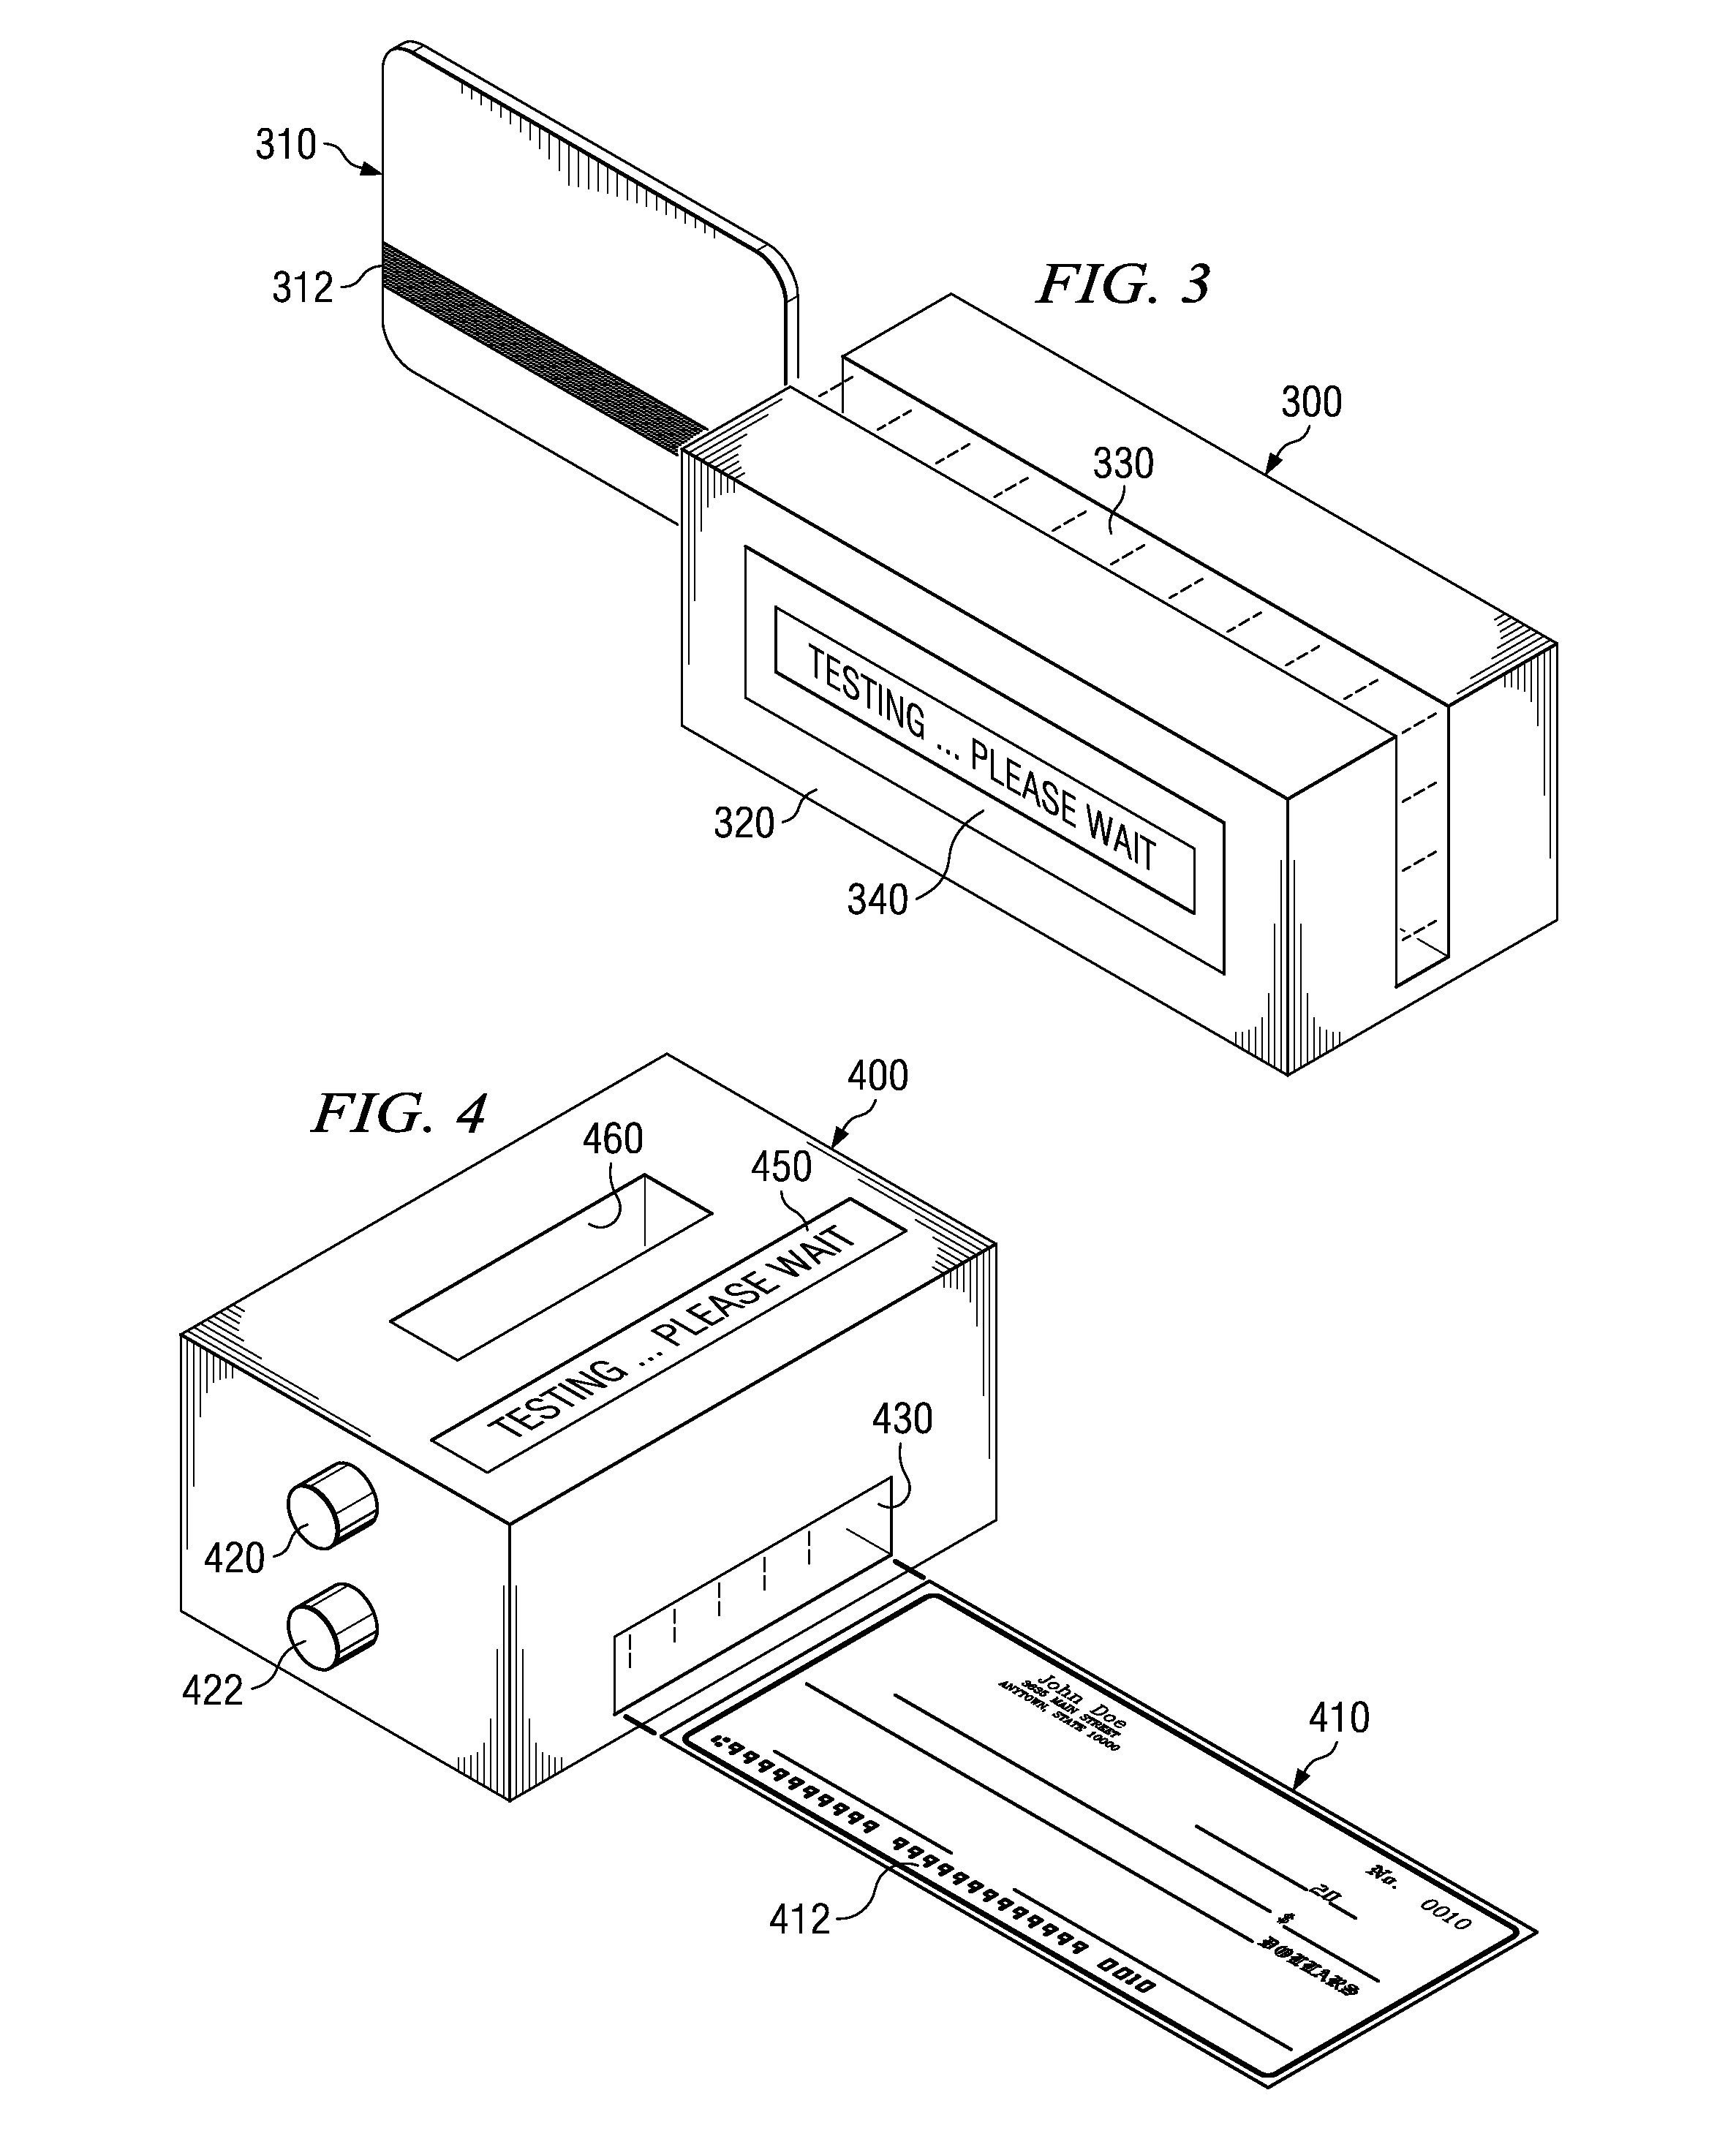 Method and system for diagnosing a magnetic reader